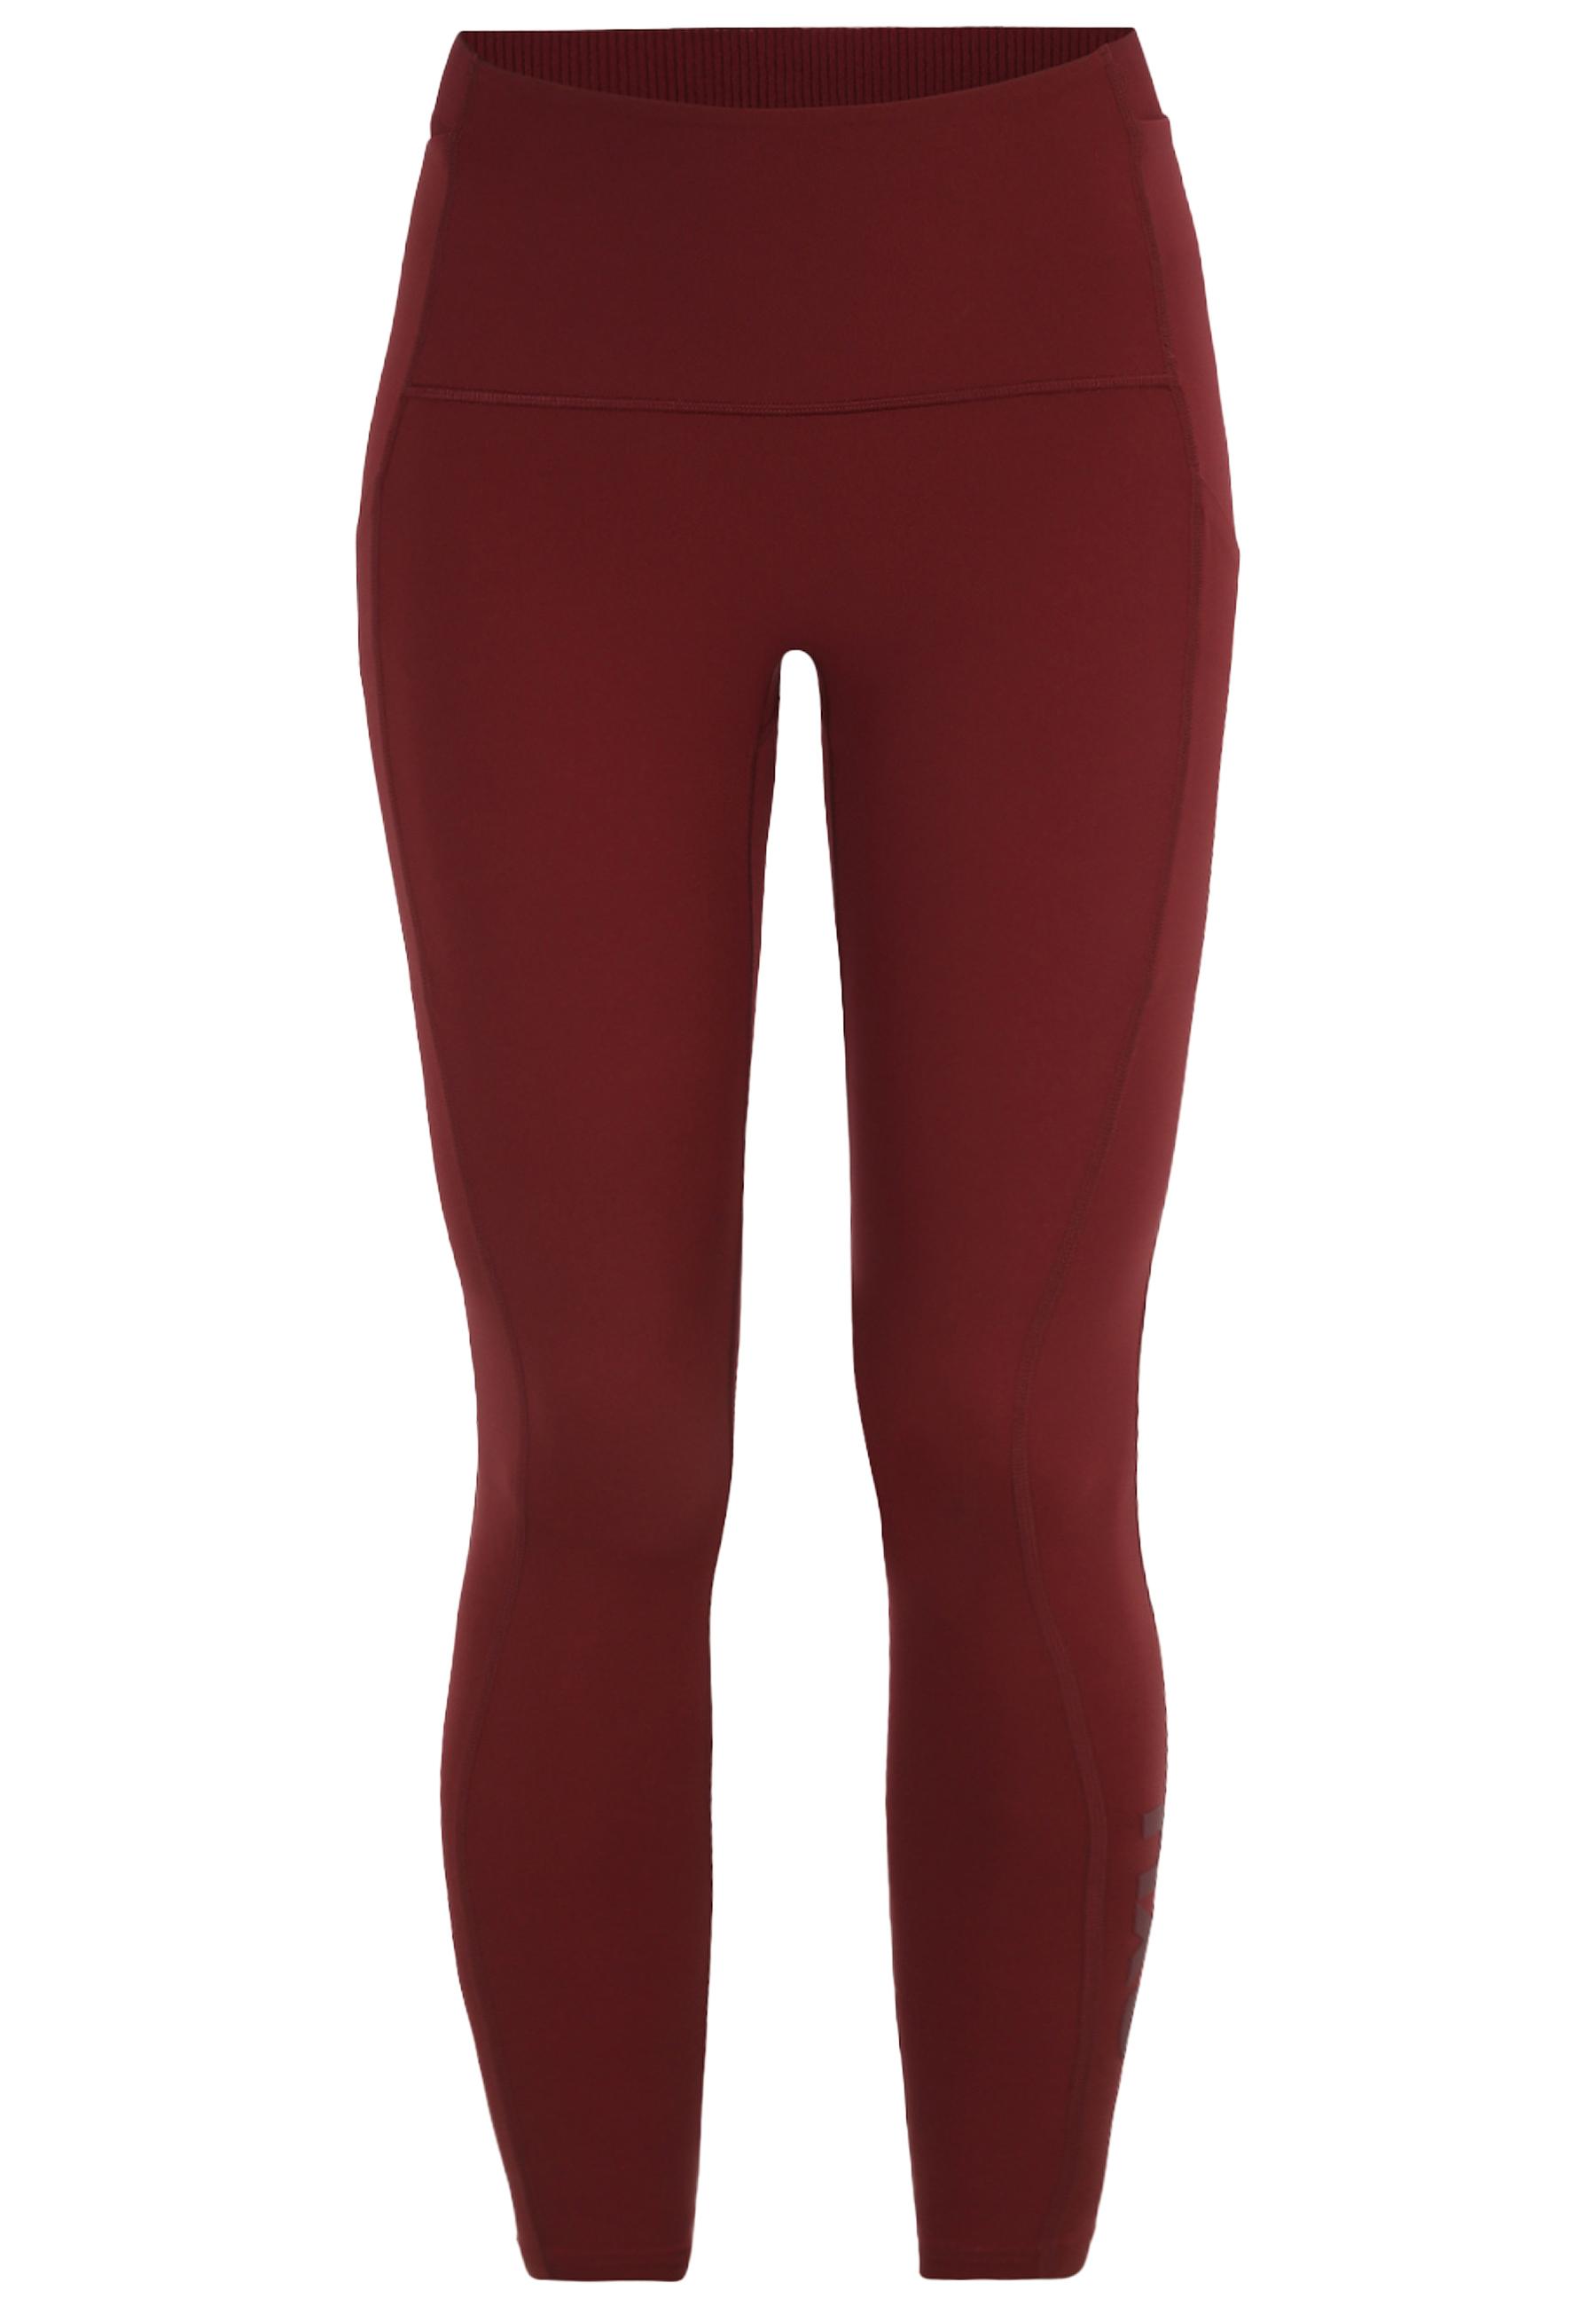 Shop 2XU Women's Form Stash HiRise Comp Tight online from